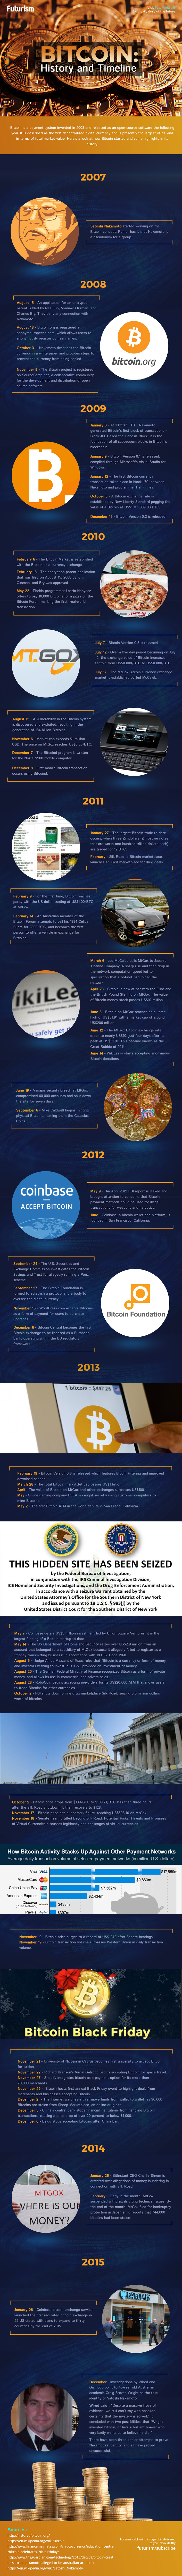 Bitcoin History and Timeline Infographic